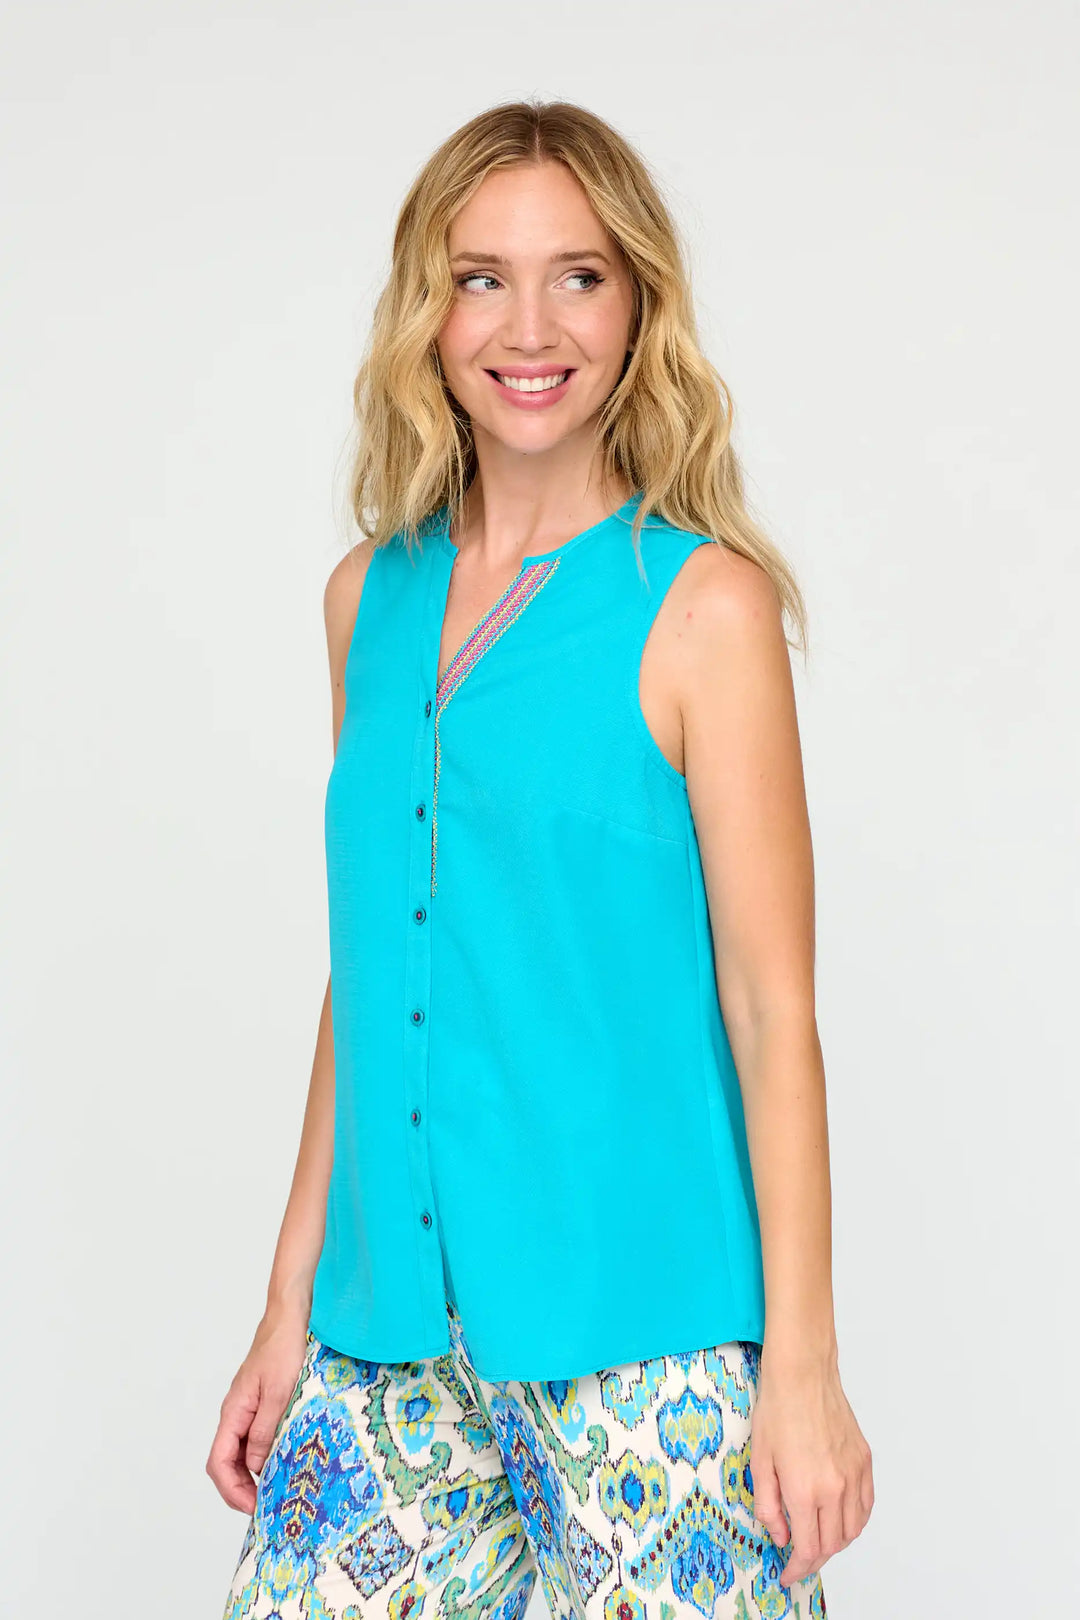 A model in the 'Walda24' style top, featuring a bright turquoise colour, sleeveless design, and button-down front, with a touch of multi-coloured trim along the V-neckline.